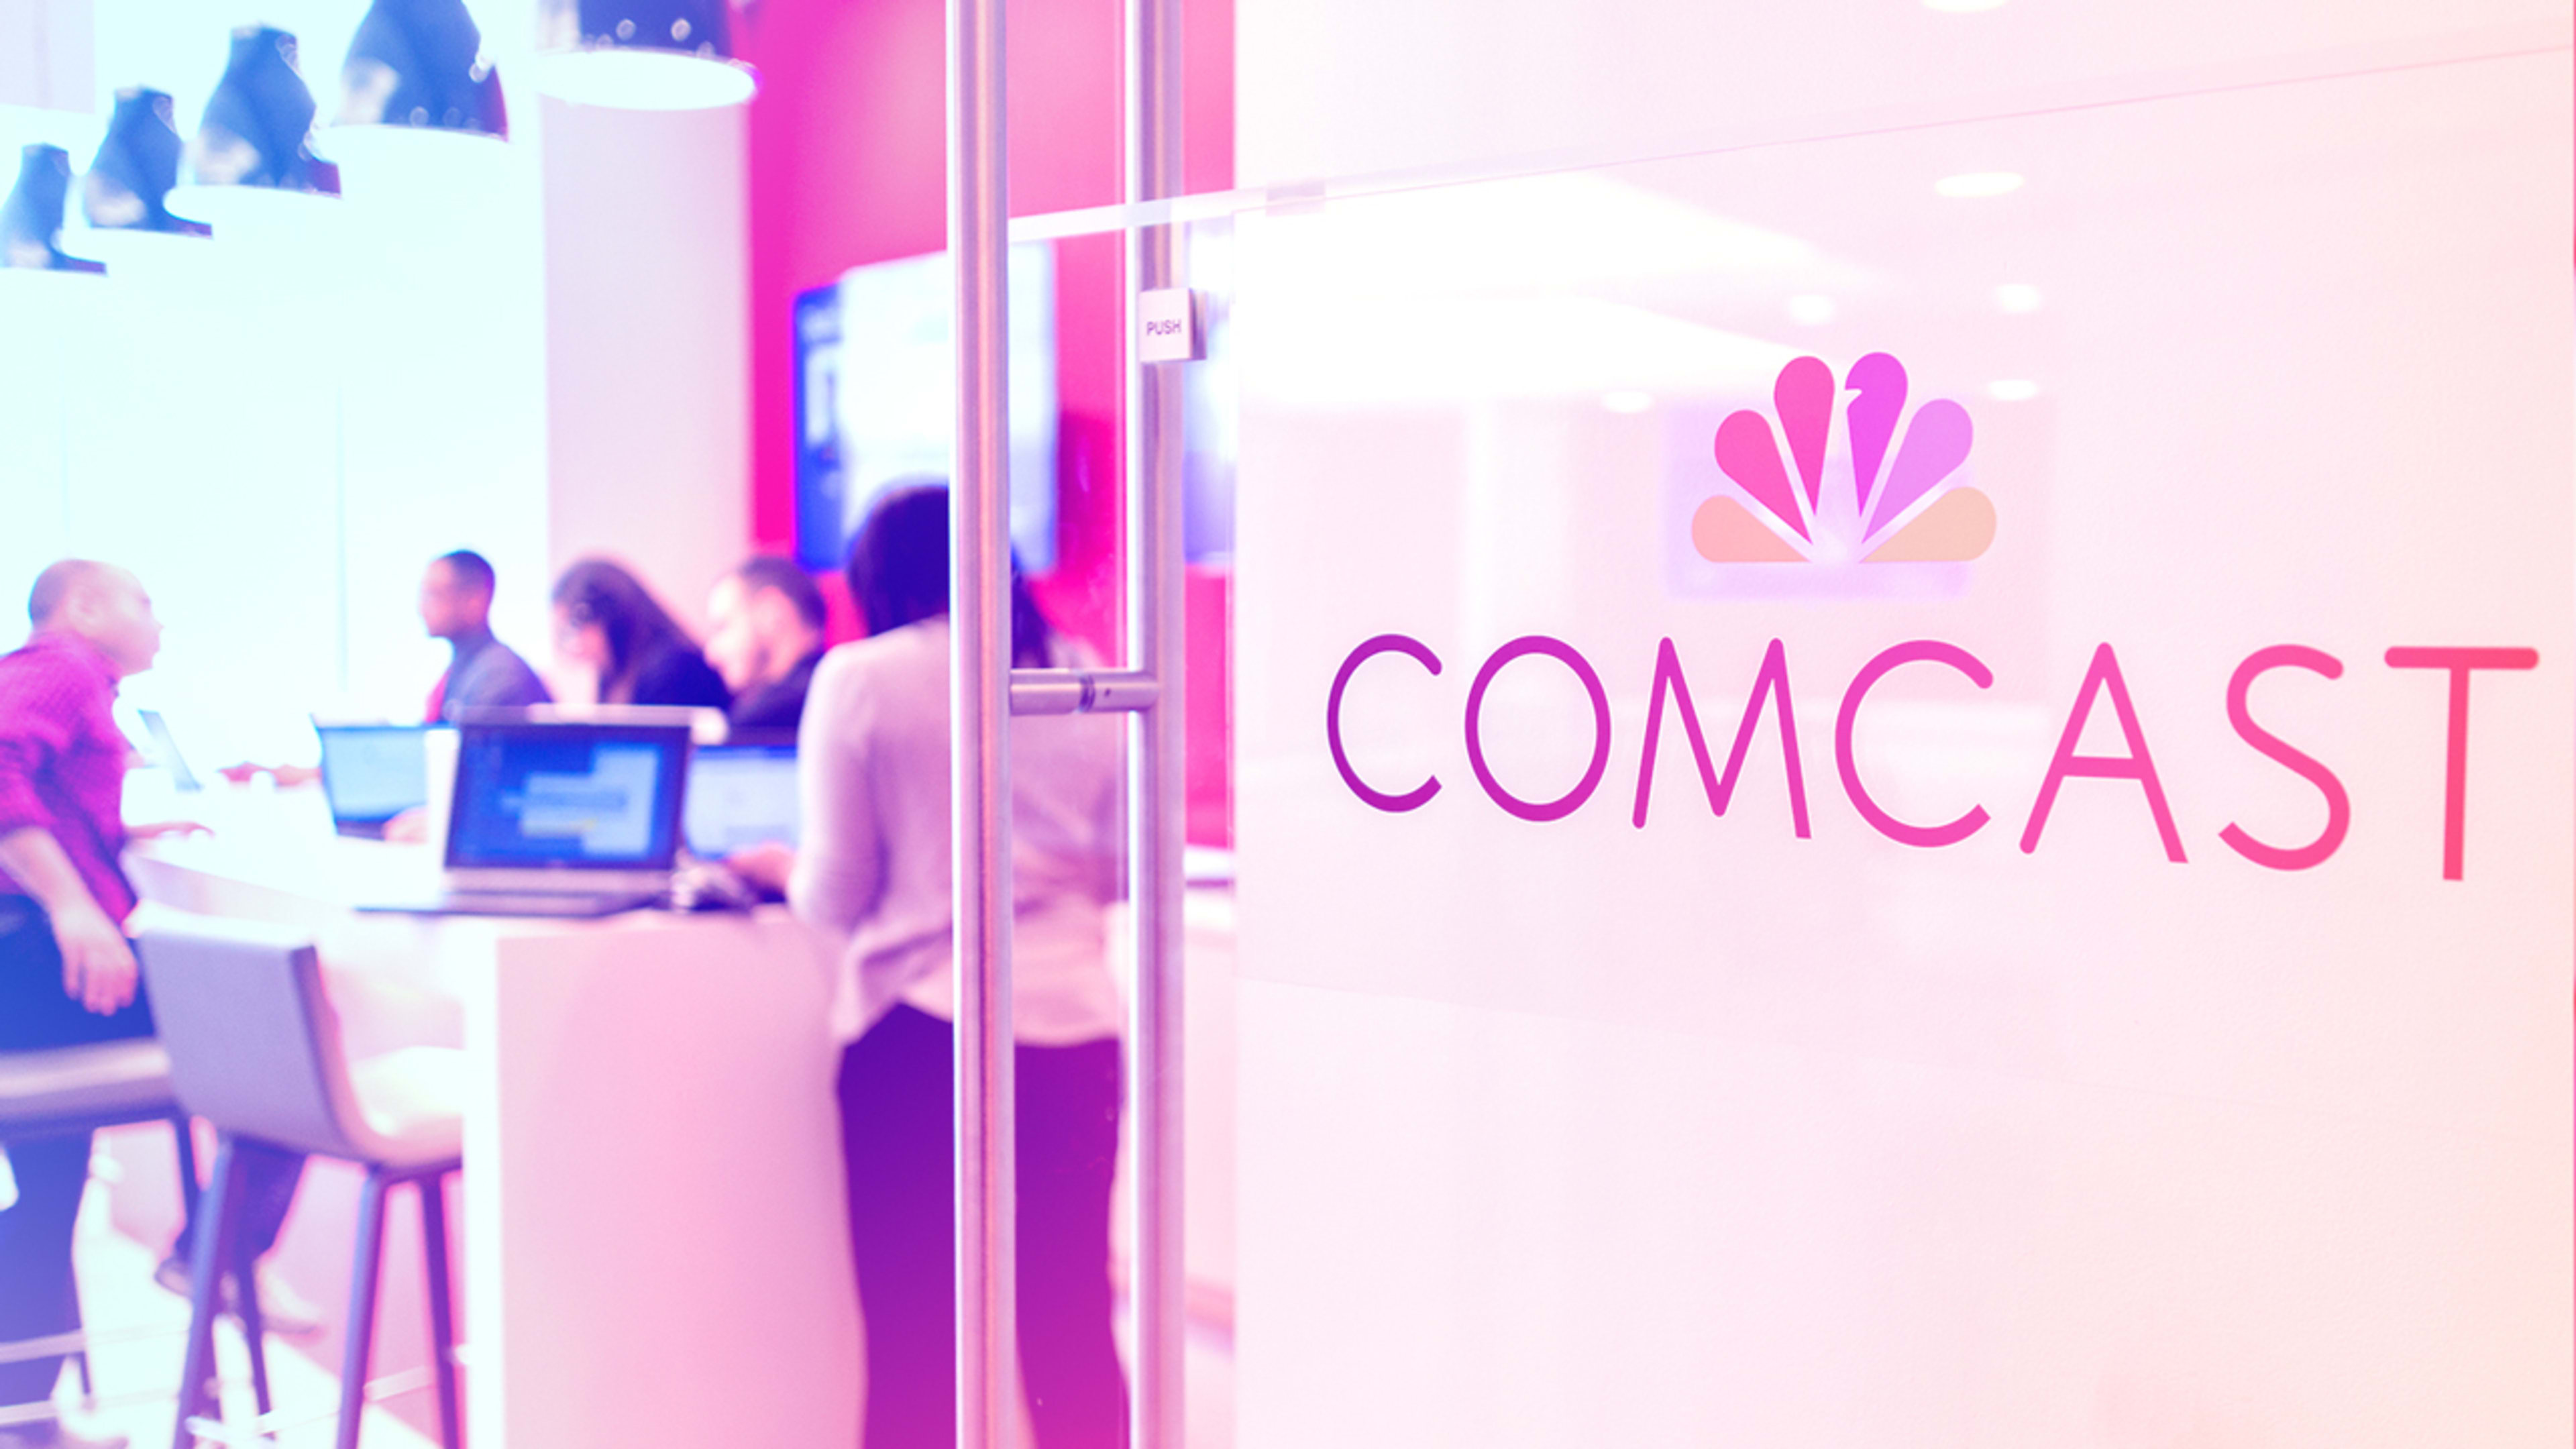 What happens to NBC shows on Hulu if Comcast sells its stake to Disney?